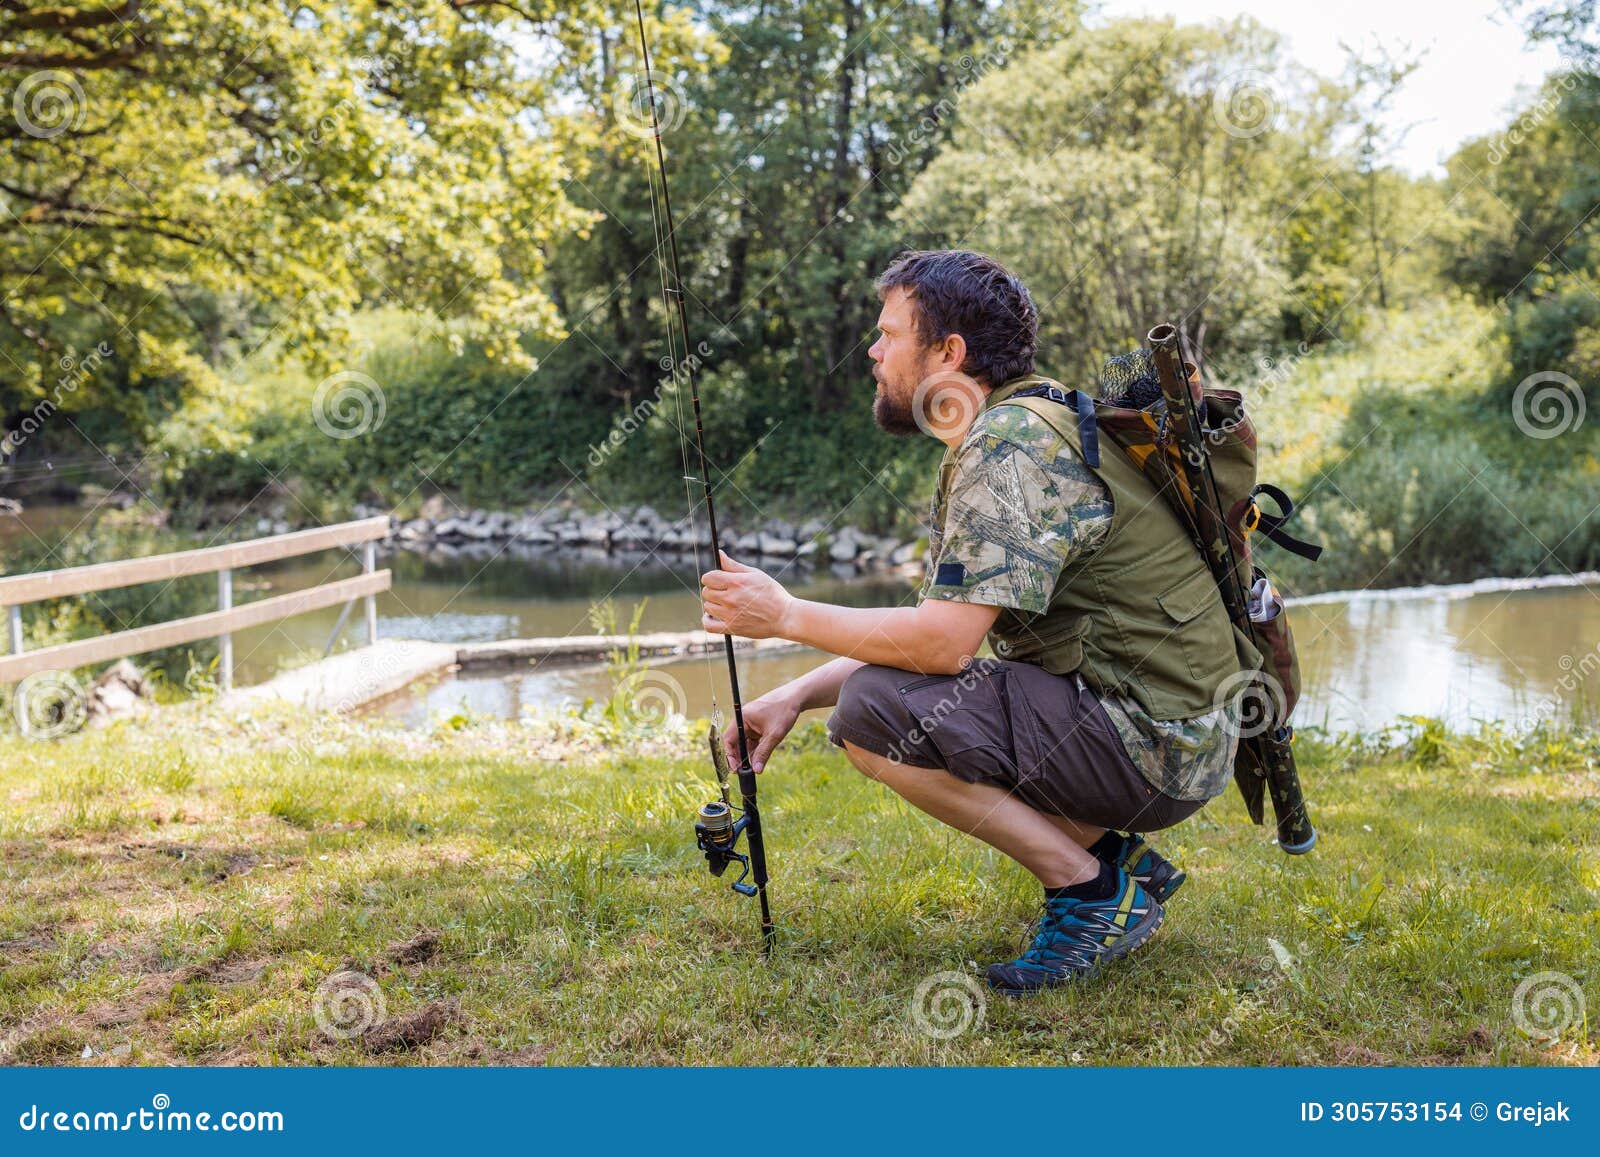 Freshwater Fisherman Holding a Fishing Rod with a Spinning Reel